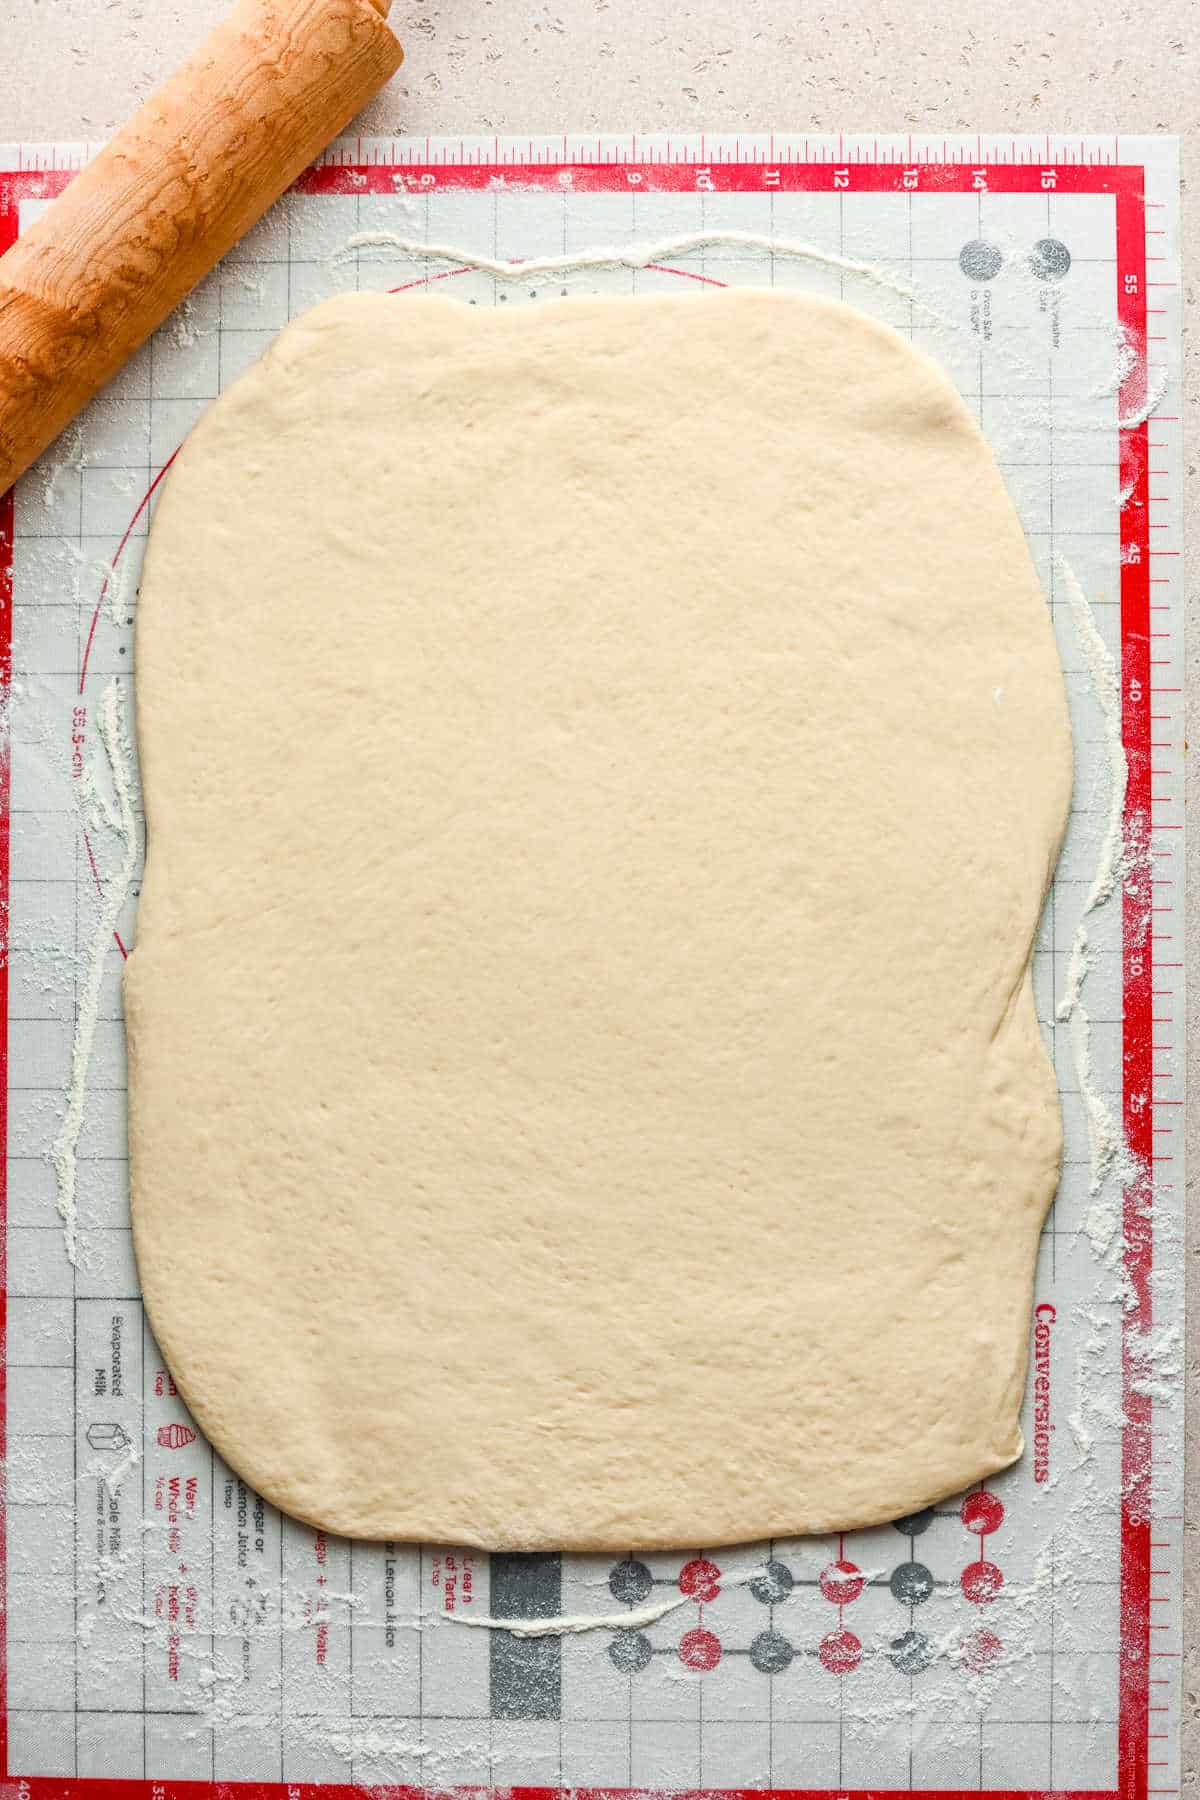 Cinnamon breadstick dough rolled out into a rectangle. 